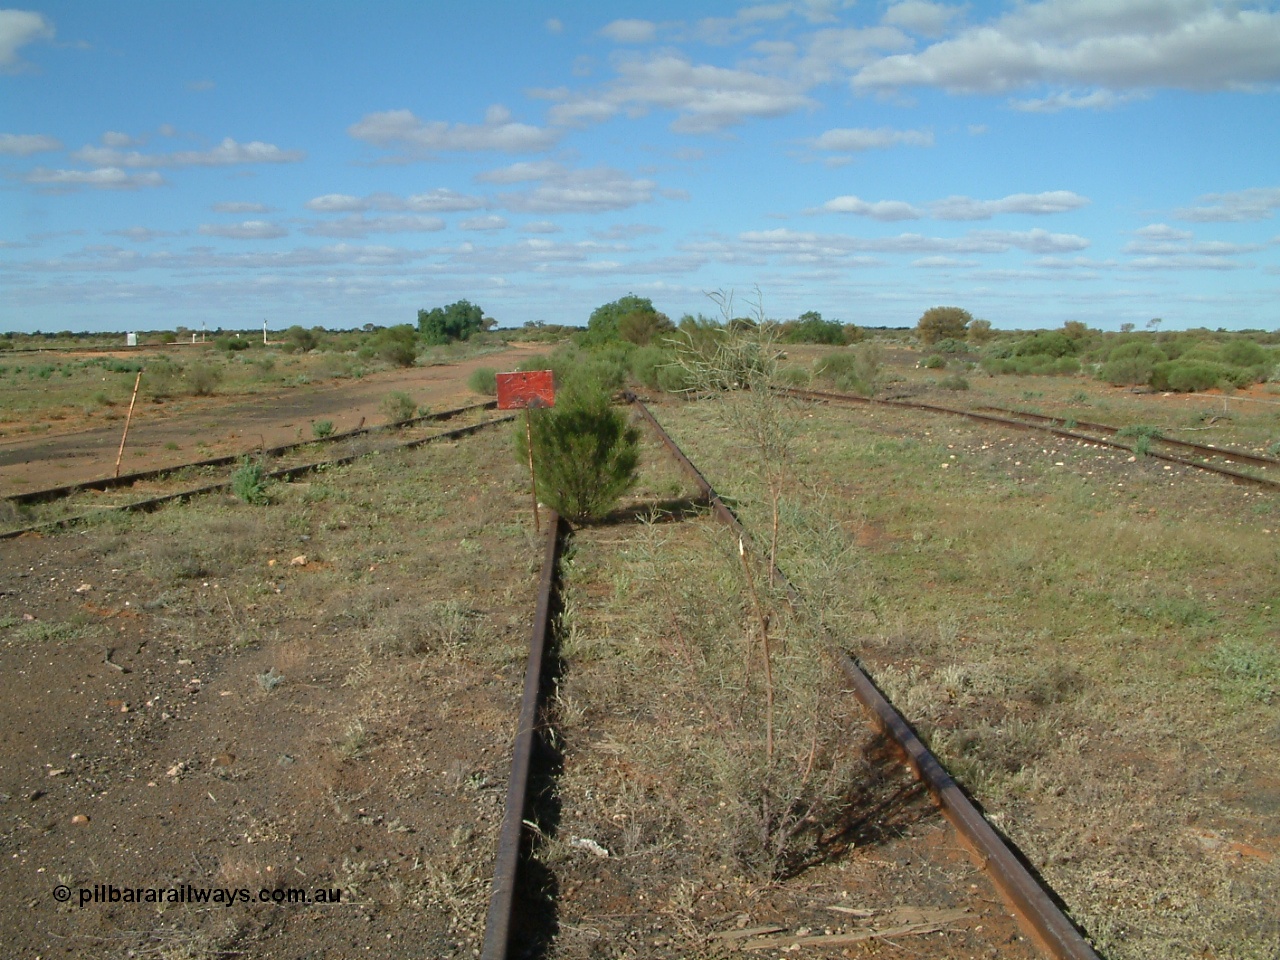 030415 155126
Tarcoola, at the 504.5 km, looking east, end of the No. 2 Loco Road, No. 1 Water Road curving in from the right, spur from Camp Train and No. 1 Loco Roads as left and mainline to the far left. [url=https://goo.gl/maps/PdmQ6oubAatDdHrL7]GeoData location[/url]. 15th April 2003.
